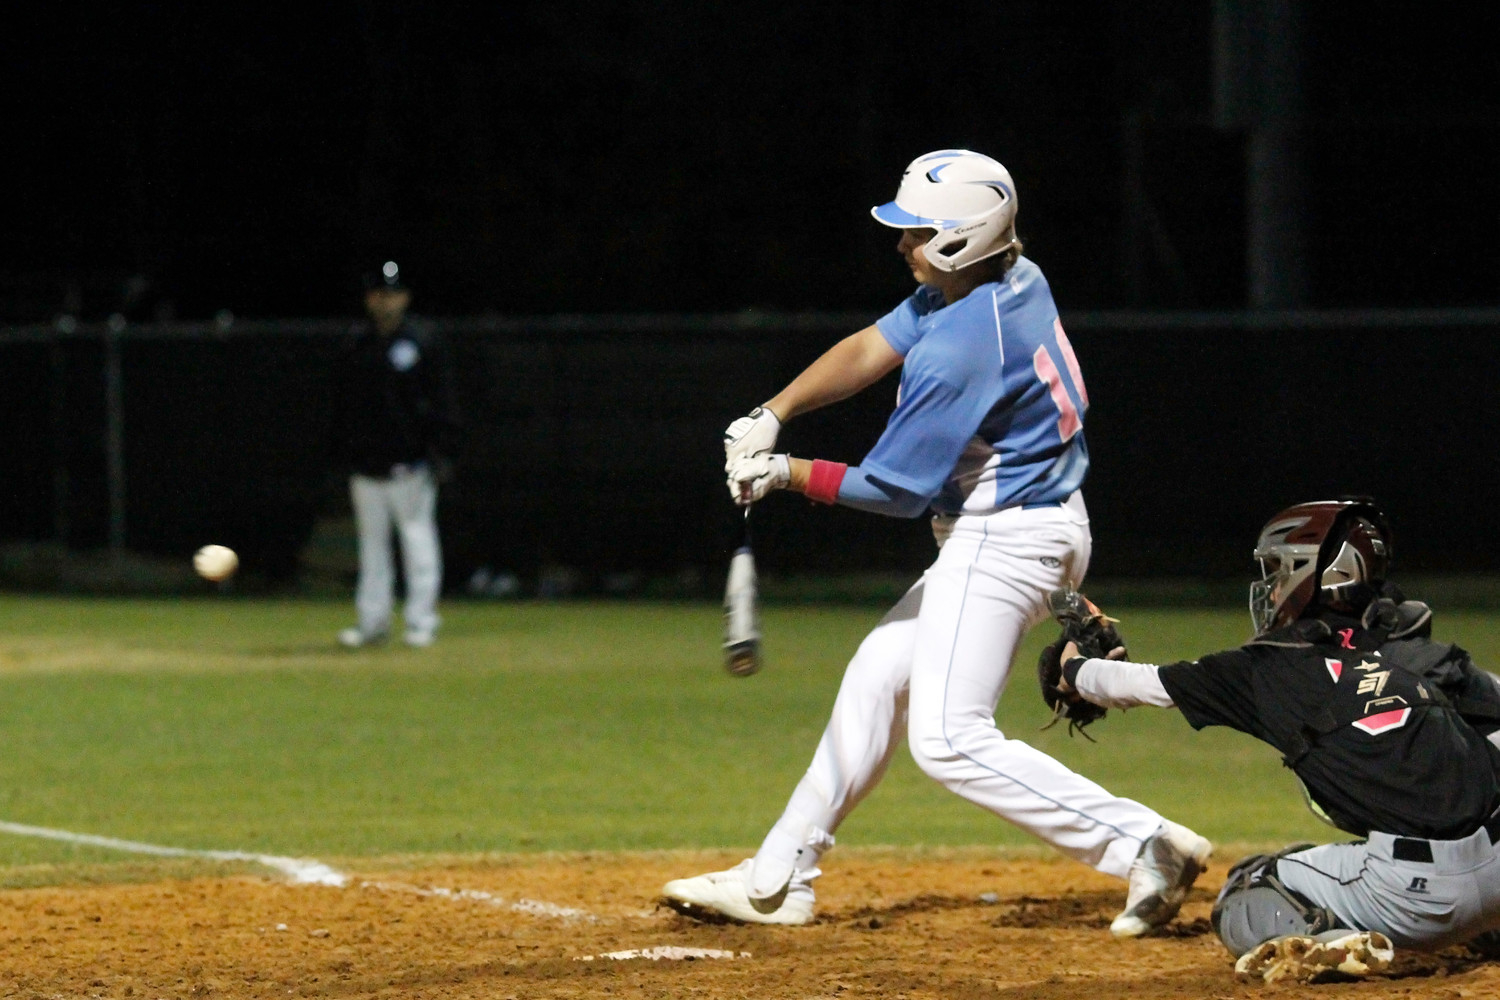 Brody Maynard of Ponte Vedra lines a pitch foul against Episcopal.